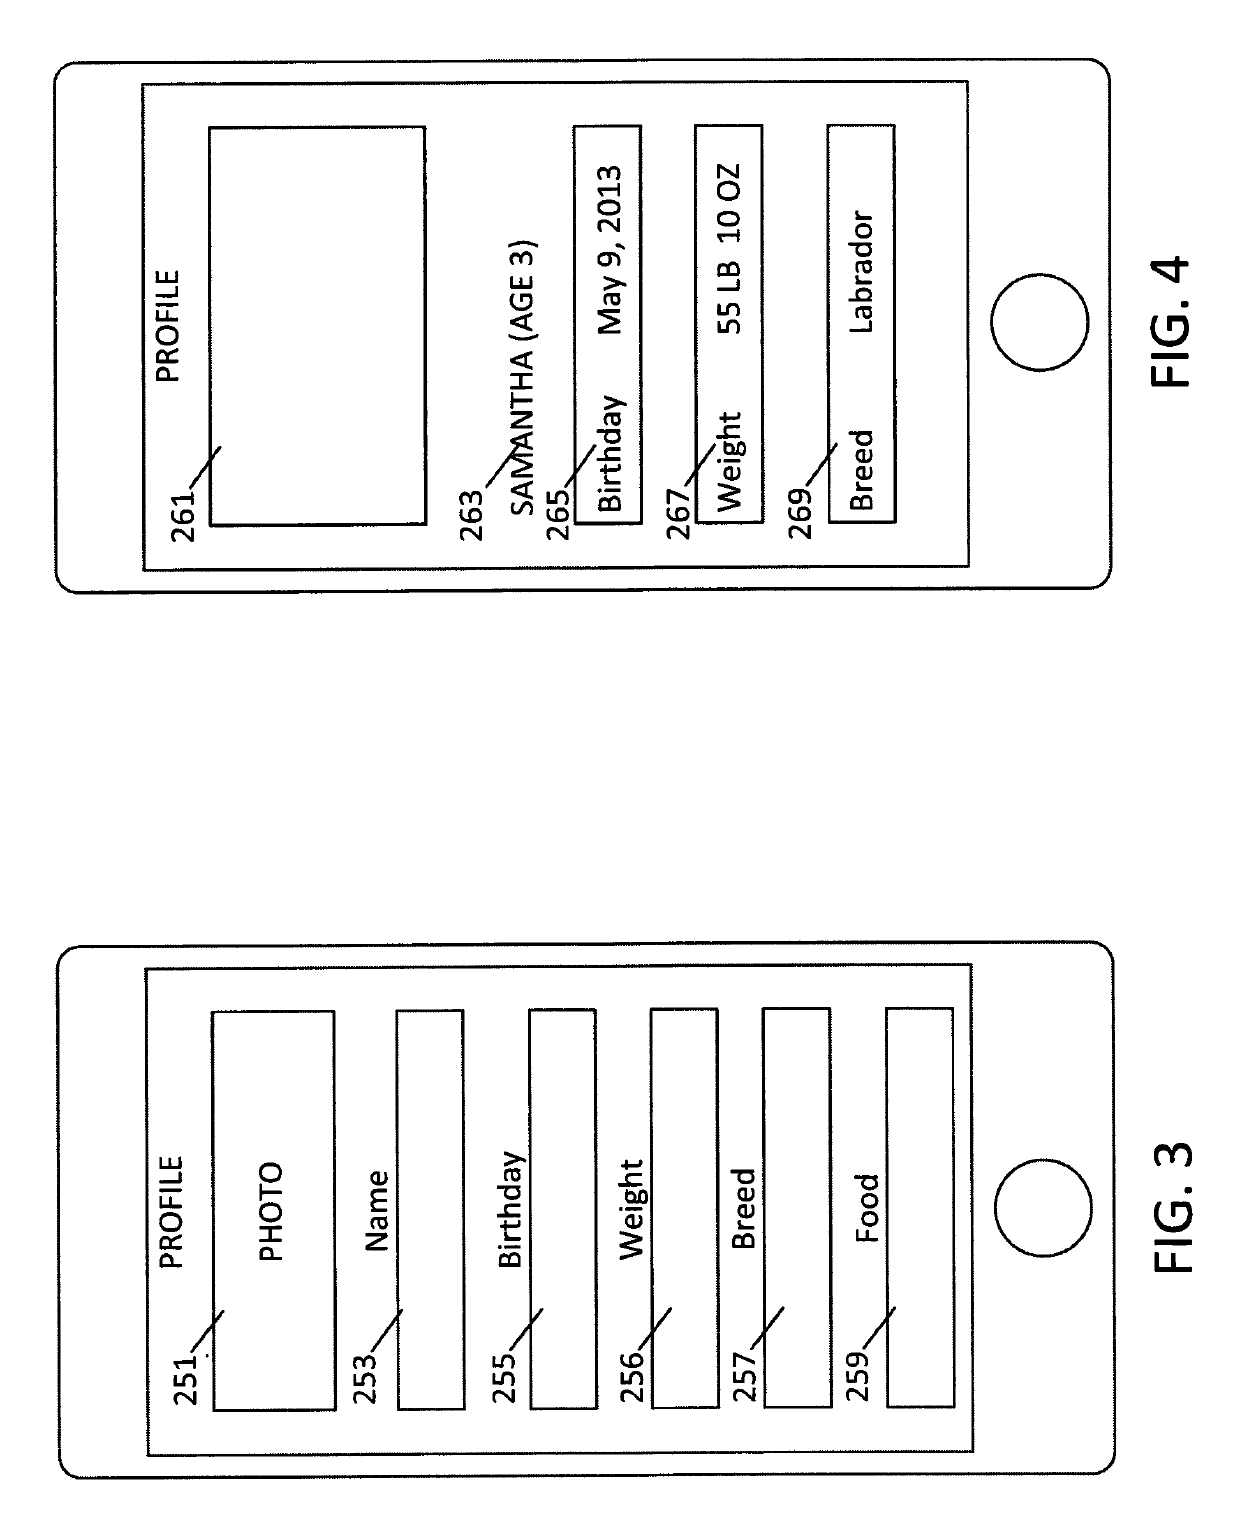 Smart tableware system, apparatus and method